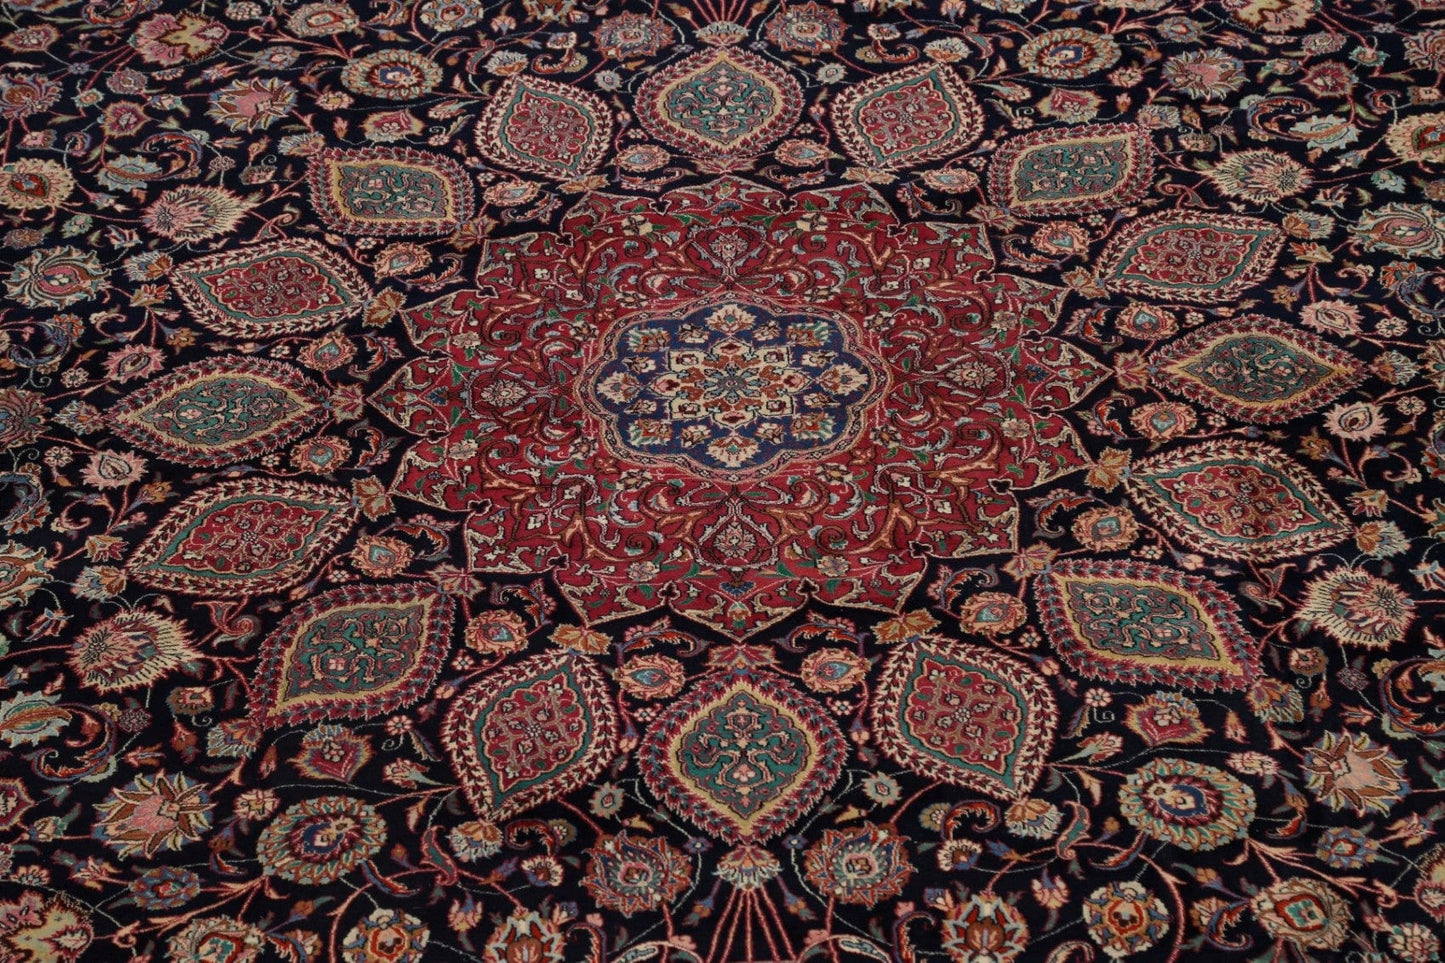 Large Floral Mashad Persian Area Rug 11x15